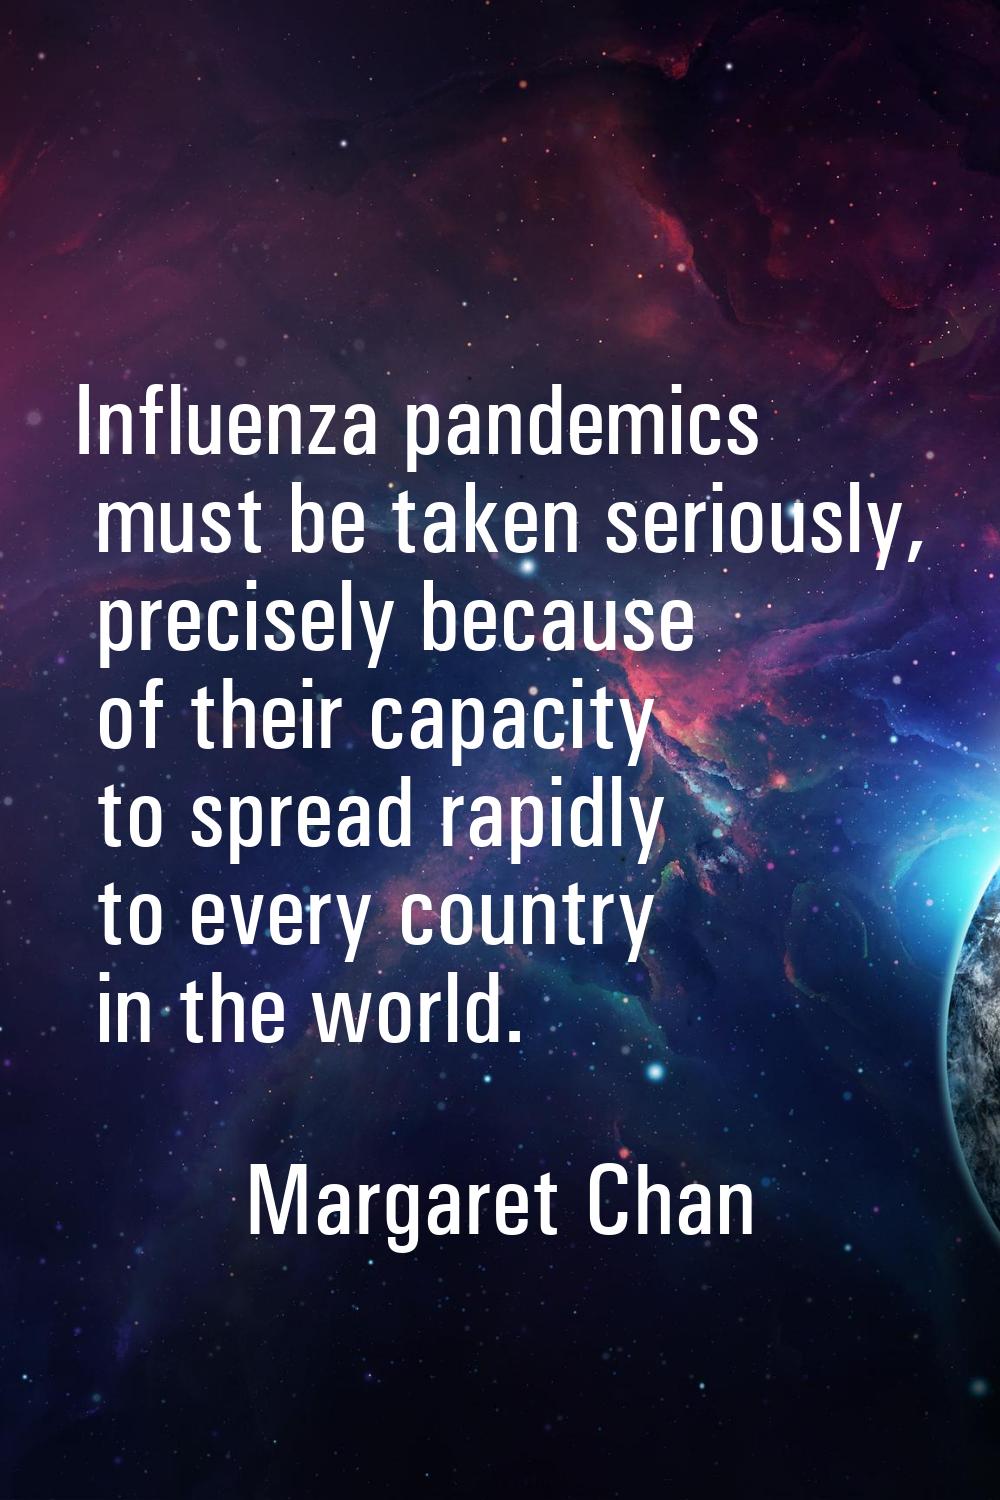 Influenza pandemics must be taken seriously, precisely because of their capacity to spread rapidly 